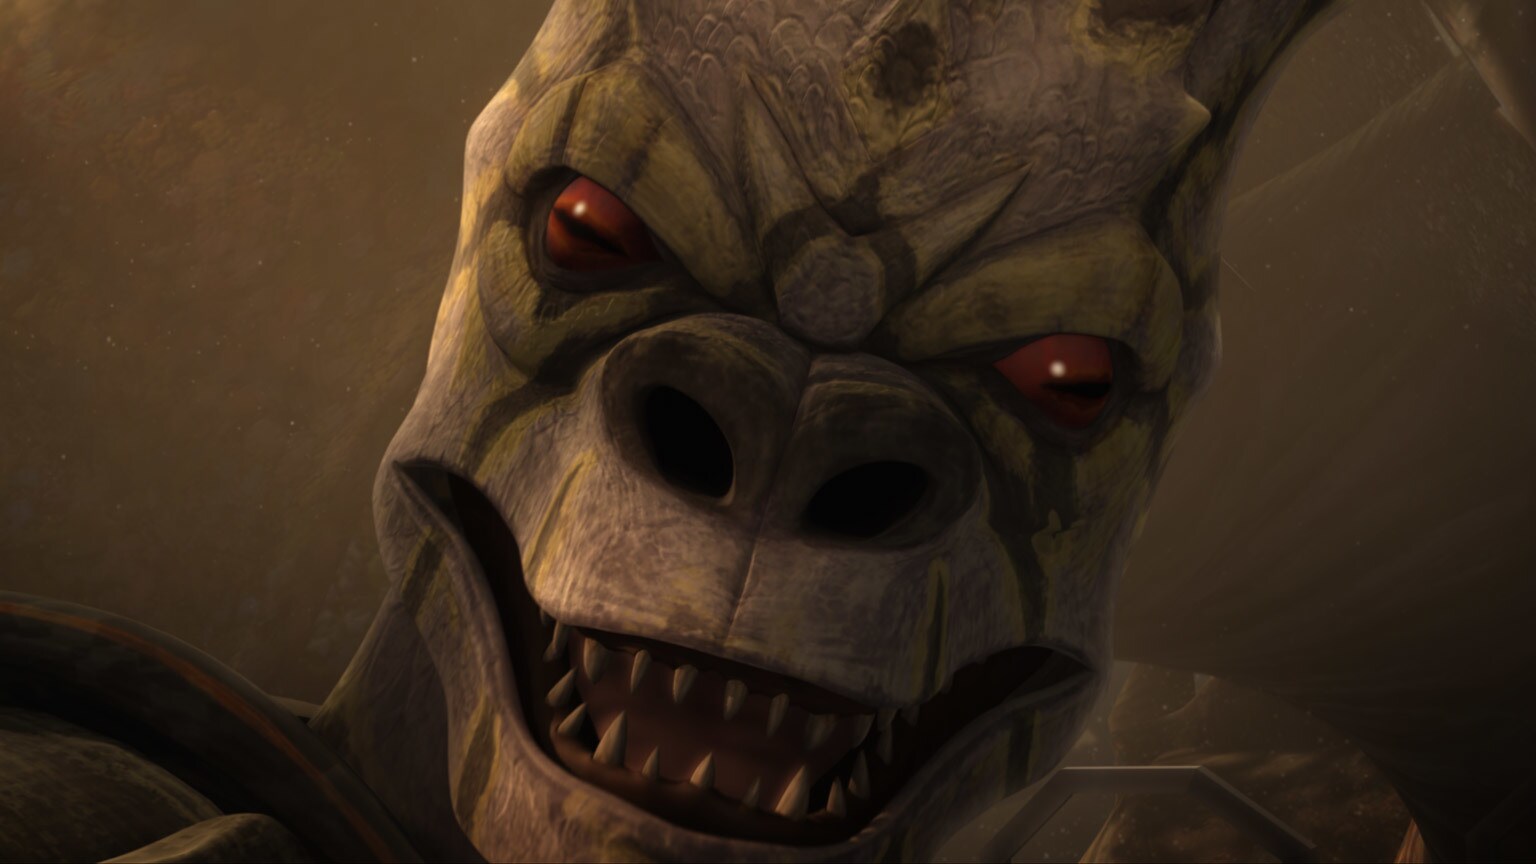 The Clone Wars Rewatch: The Chase is On in the "Wookiee Hunt"